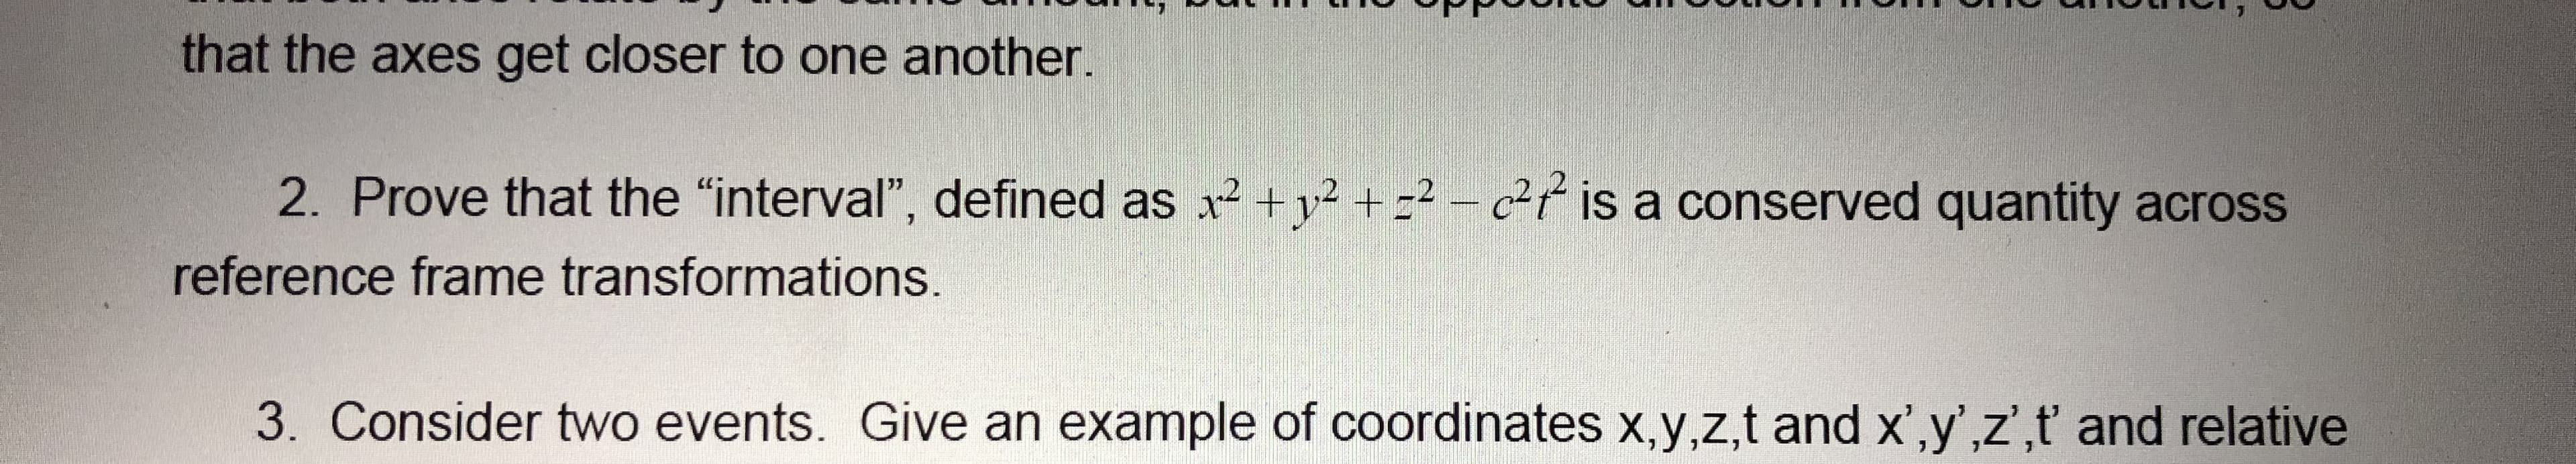 that the axes get closer to one another.
2. Prove that the "interval", defined as x² +v² + =² – c²¢ is a conserved quantity across
reference frame transformations.
3. Consider two events. Give an example of coordinates x,y,z,t and x',y',z',t and relative
